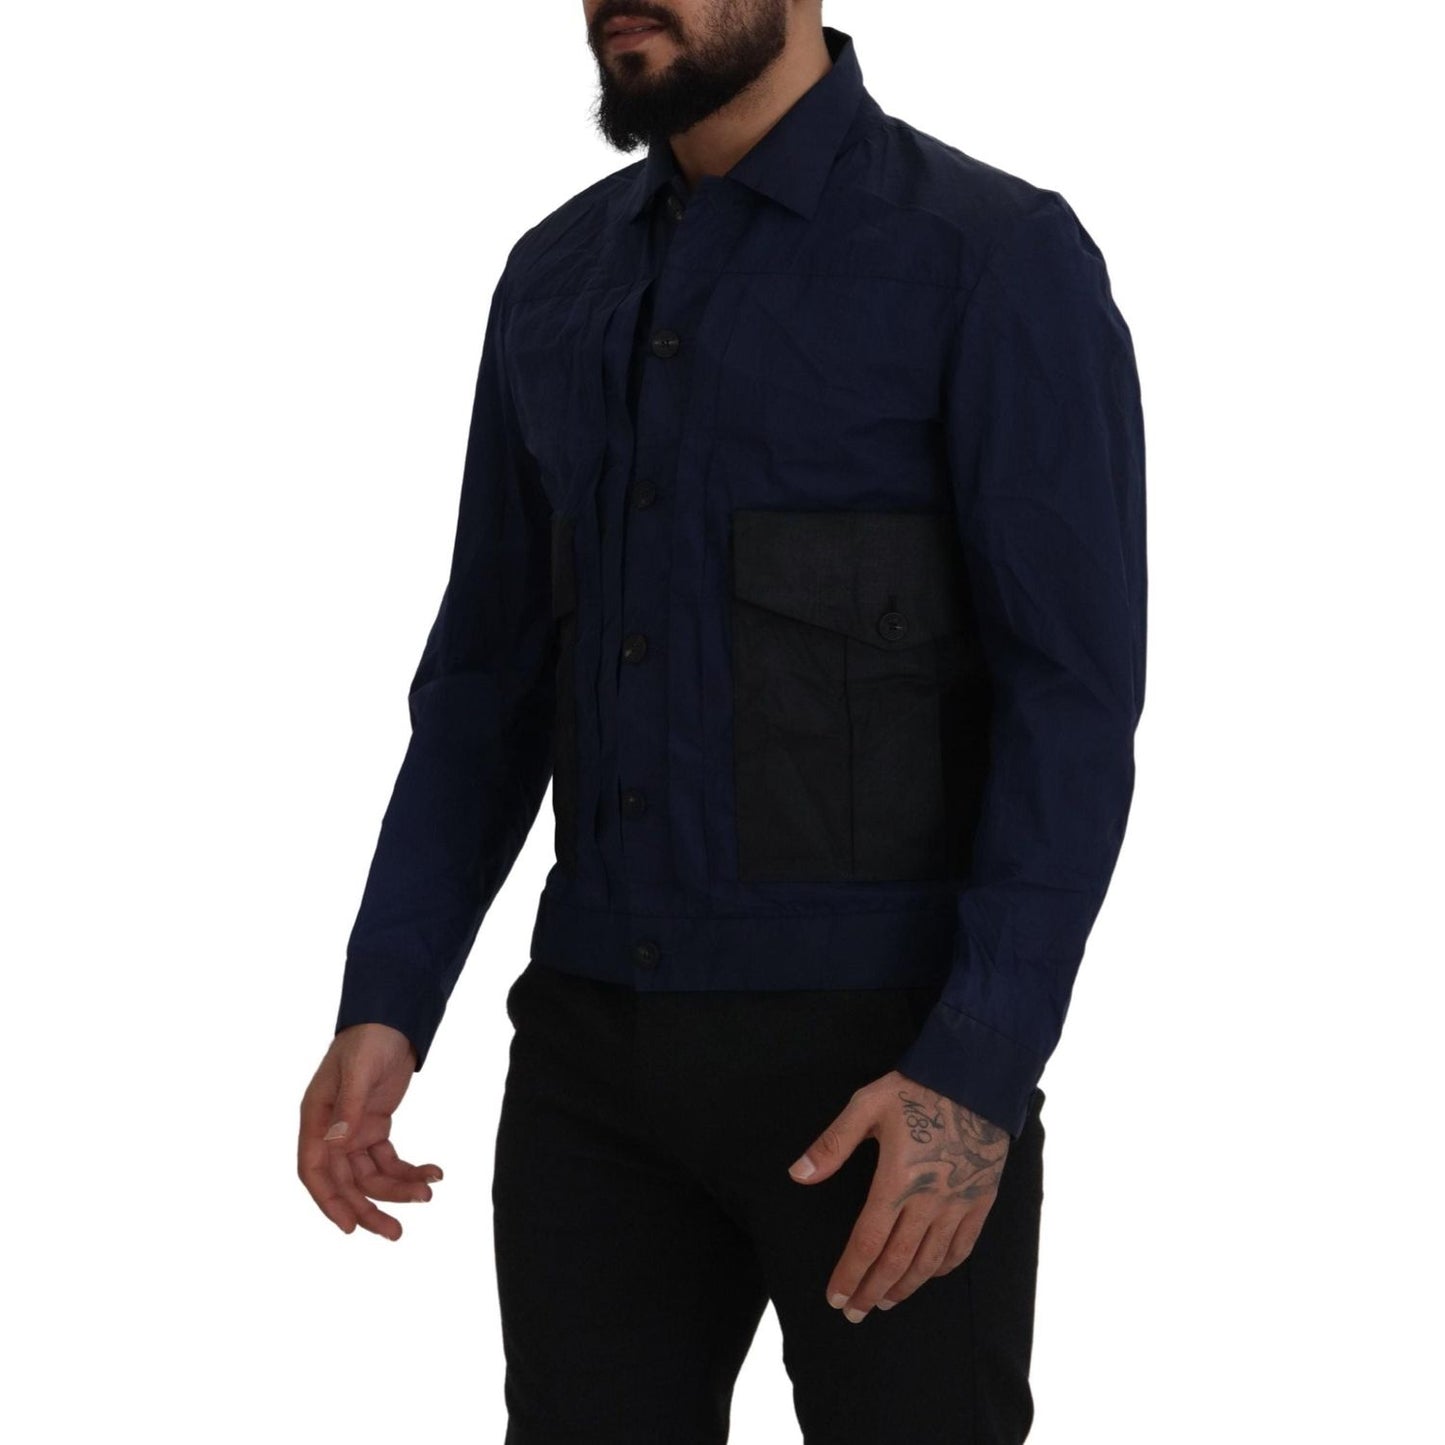 Dsquared² Svelte Dark Blue Cotton Shirt dark-blue-cotton-collared-long-sleeves-casual-shirt IMG_7206-scaled-99f7fb2a-3fa.jpg